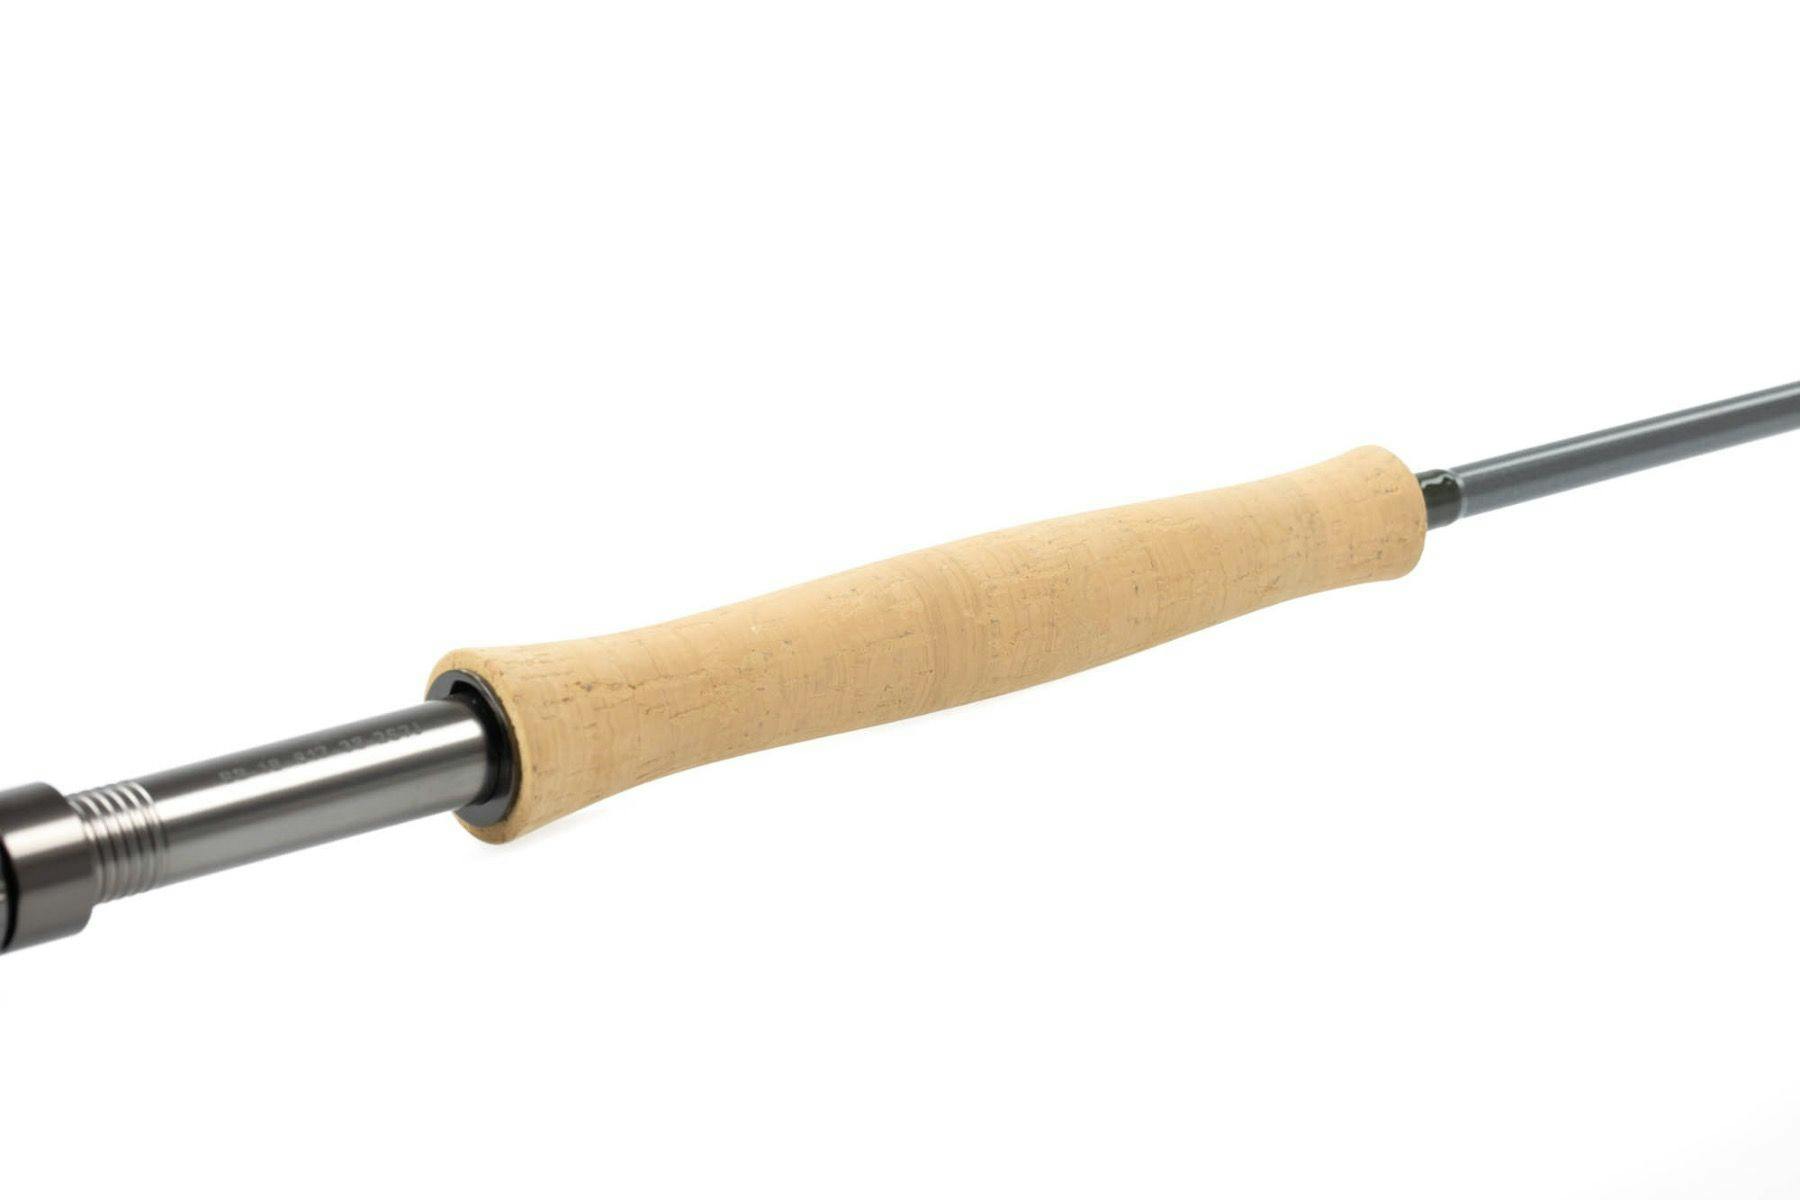 Orvis Clearwater Fly Rod · 8'6" · 5 wt